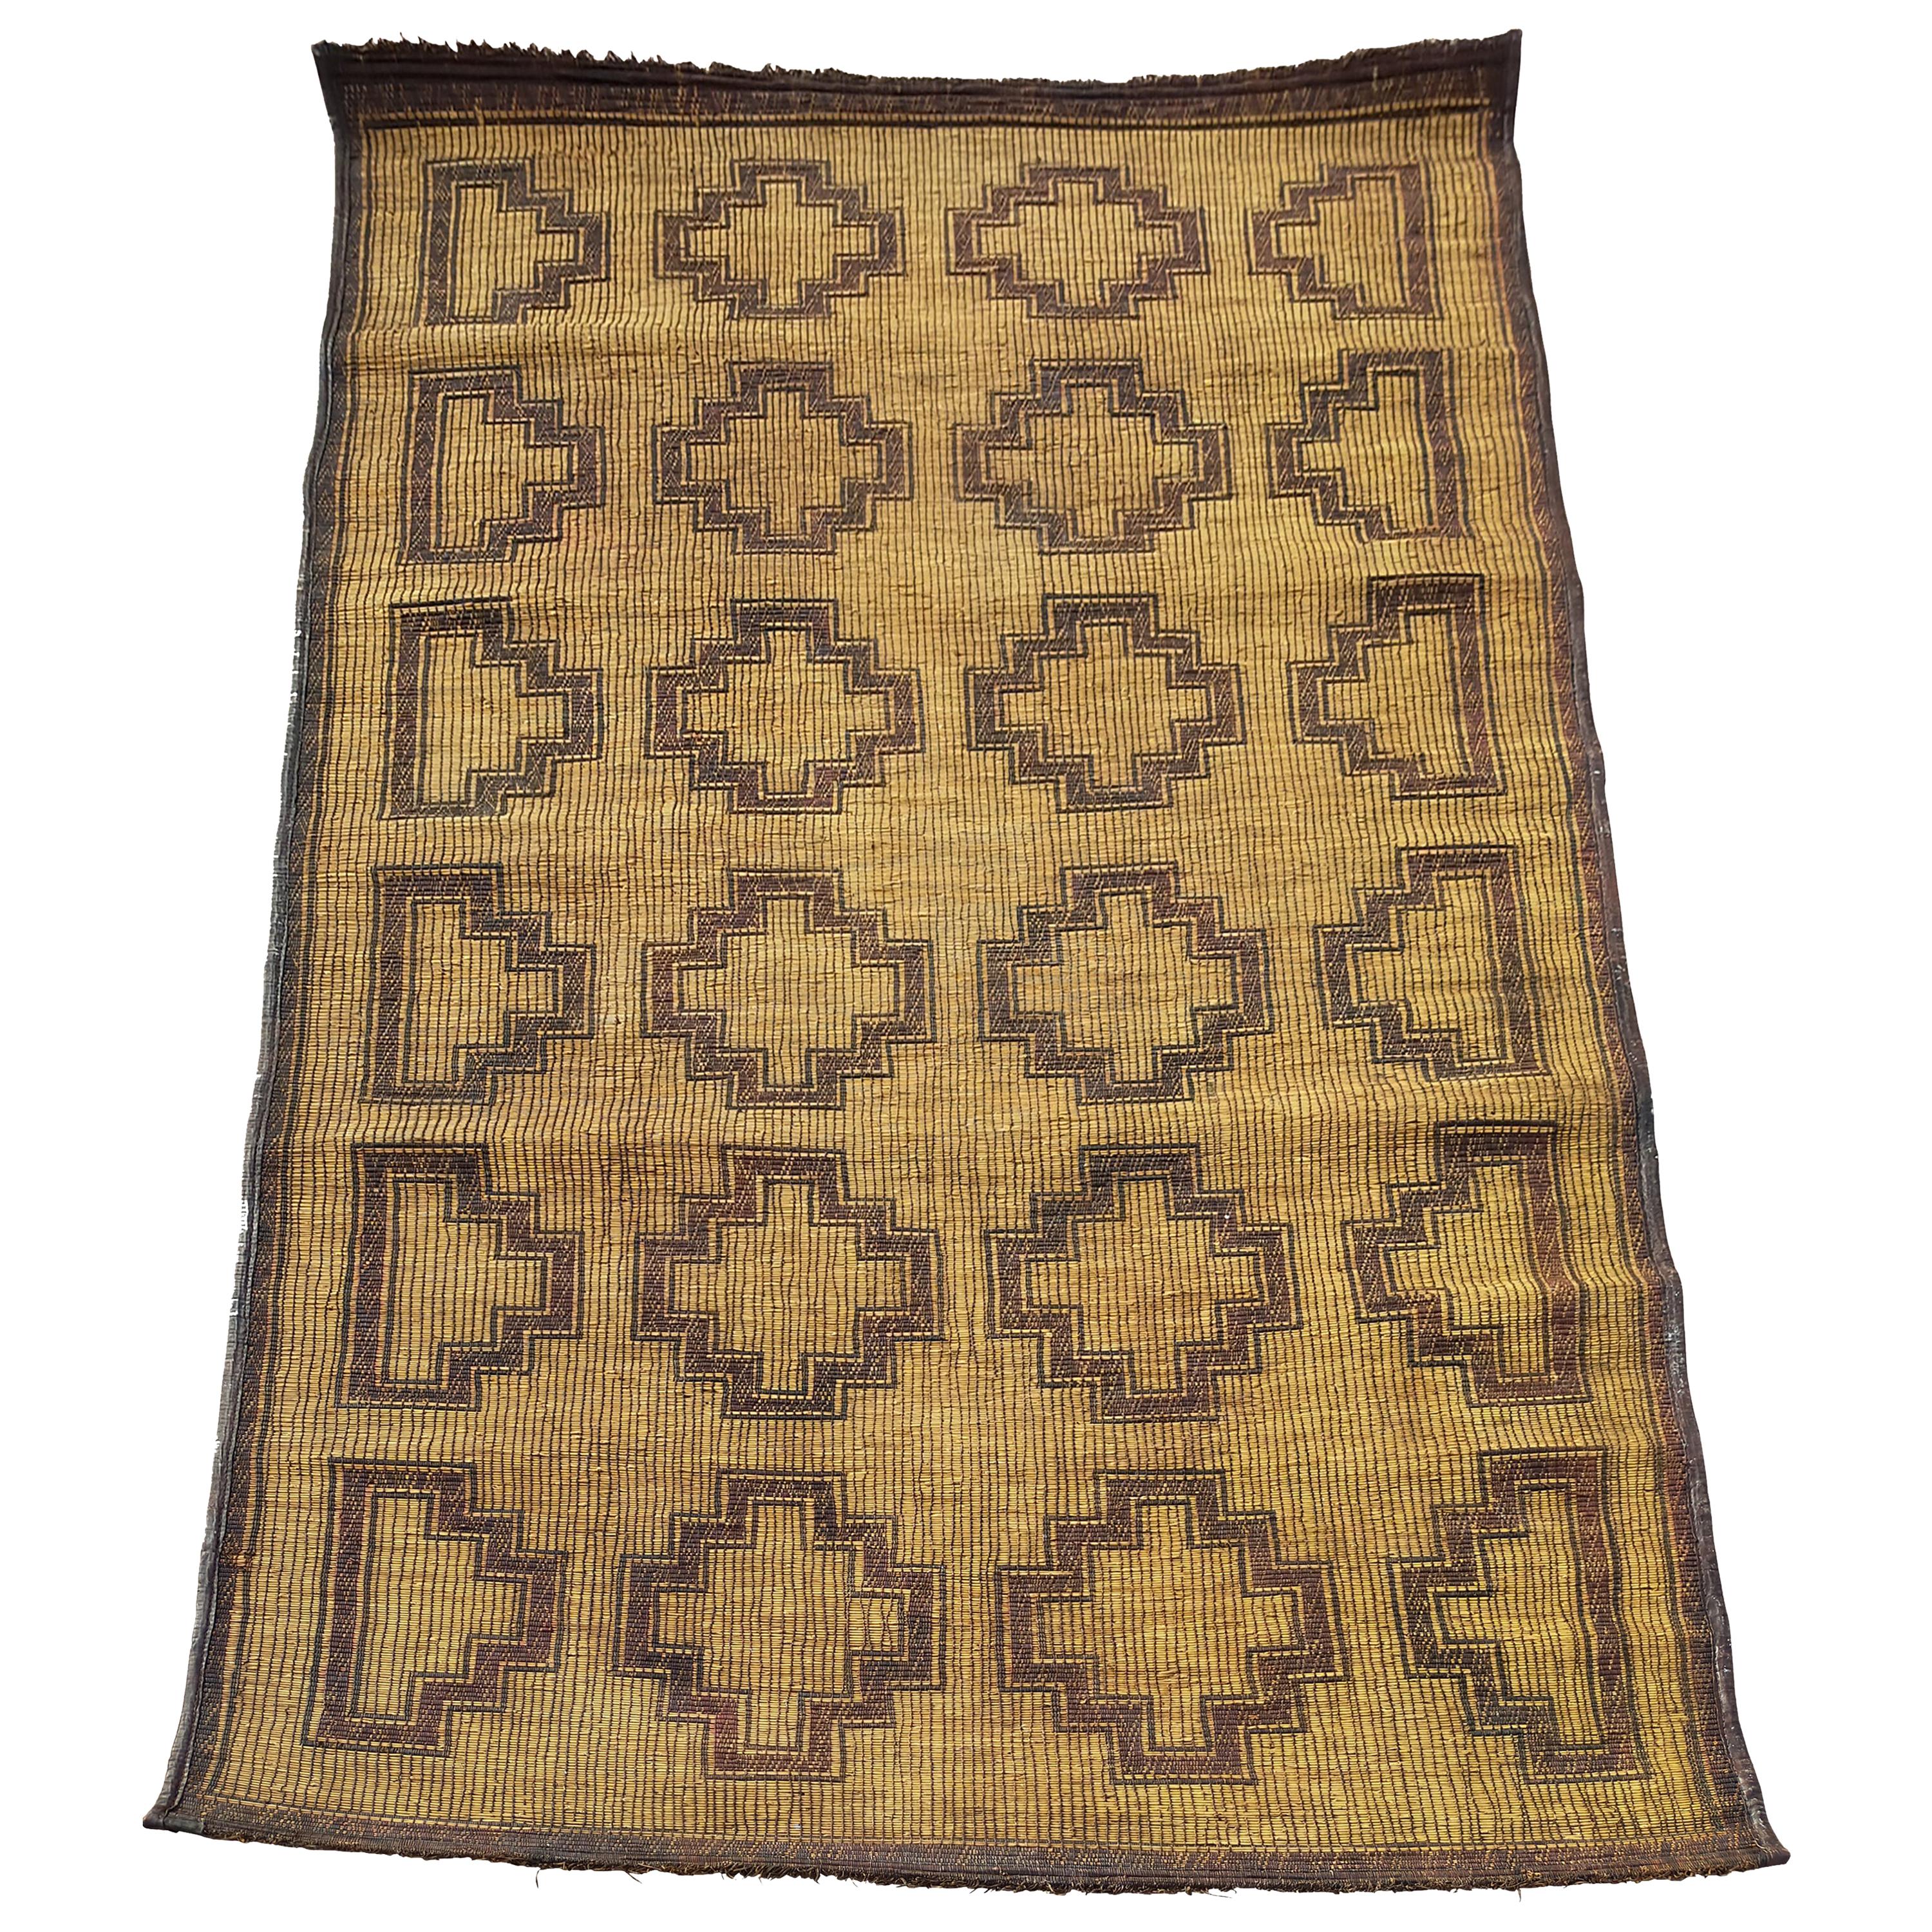 Mauritania Mat from Sahara in Palm Wood and Leather, Mid-Century Modern Design